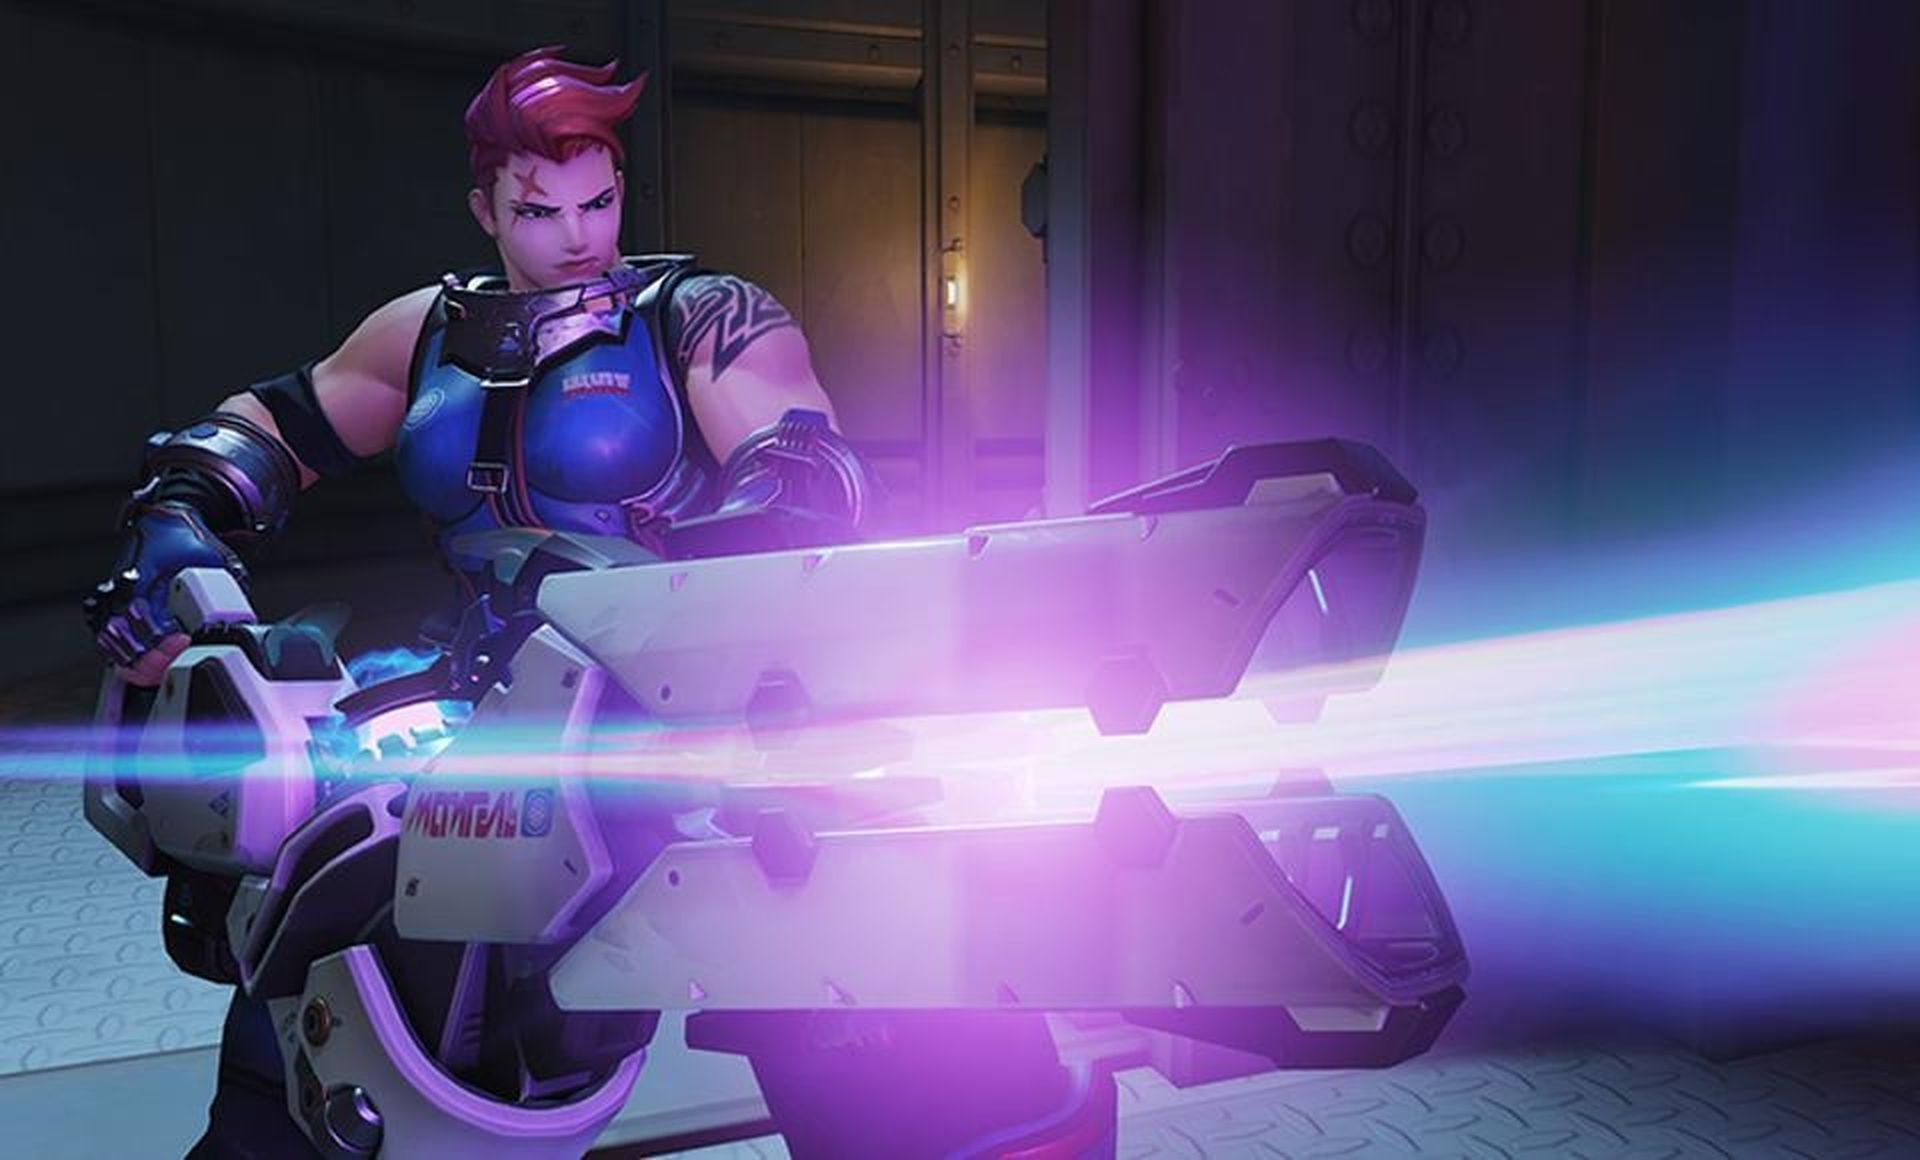 In today's article, we are going to over our Overwatch tier list 2022, so you can find out the best heroes for you and dominate the opposition in Overwatch 2.